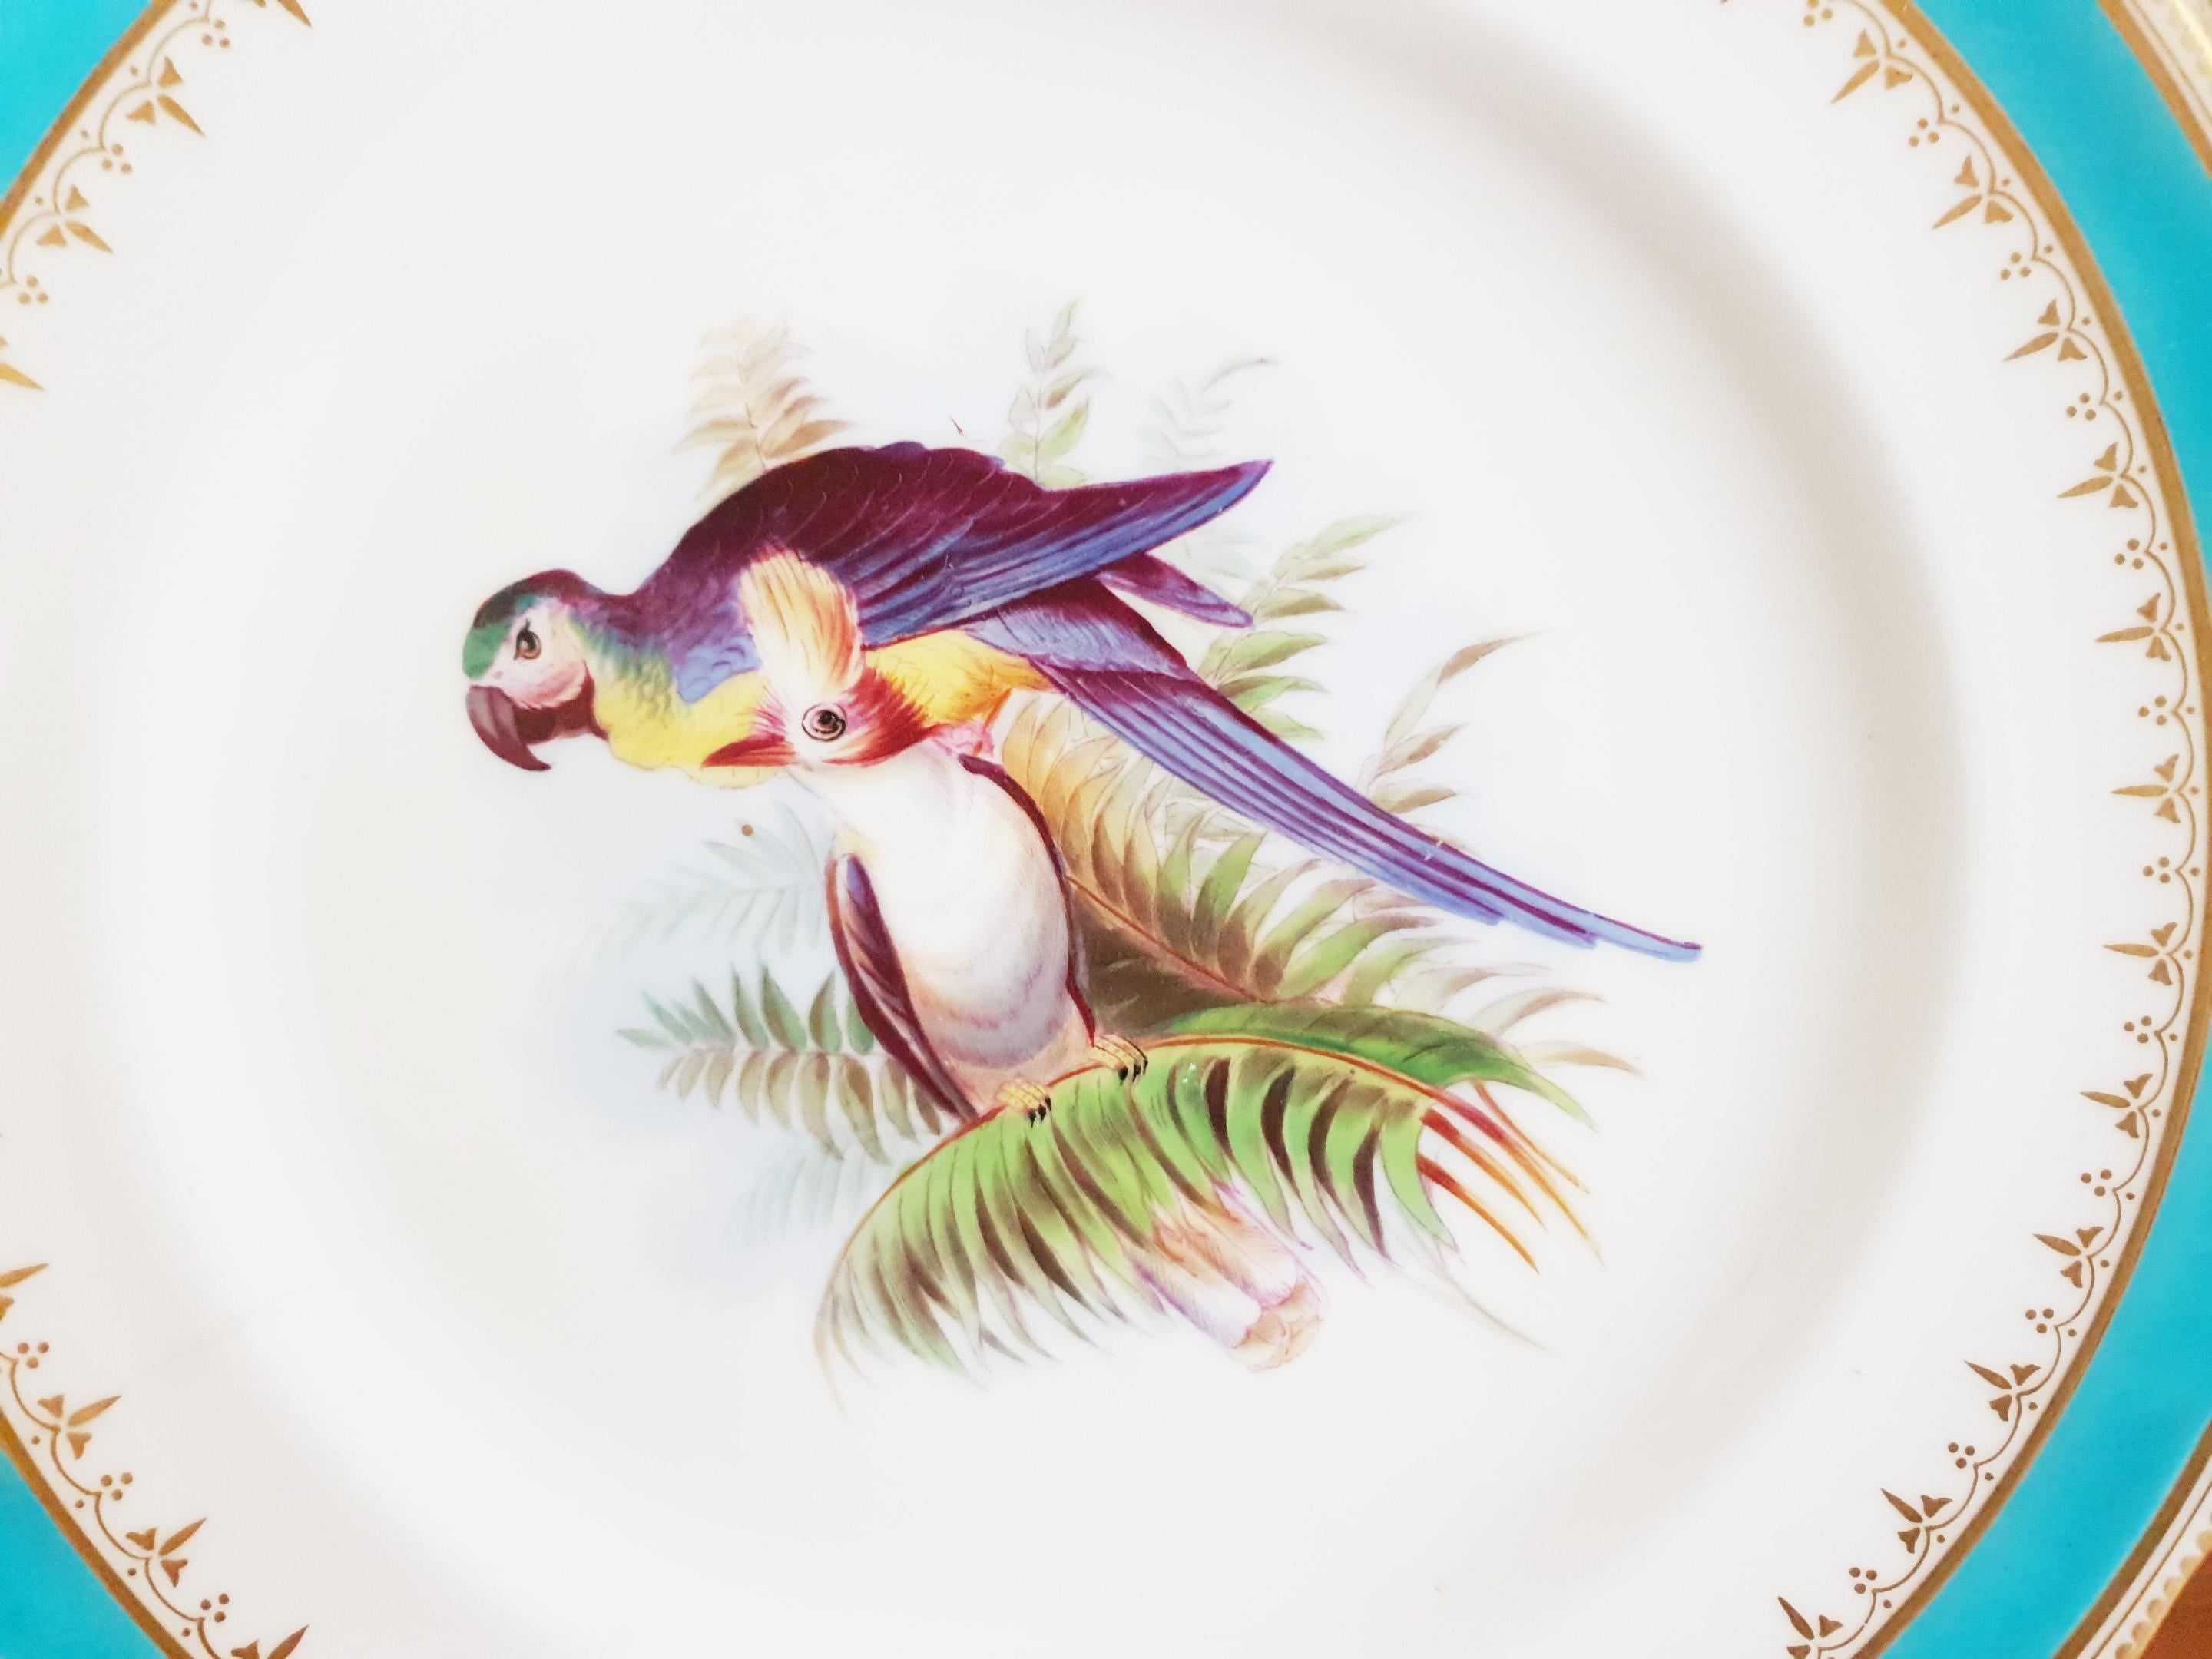 Minton Hand Painted Dinner Plates with Humming Birds and Parrots For Sale 2